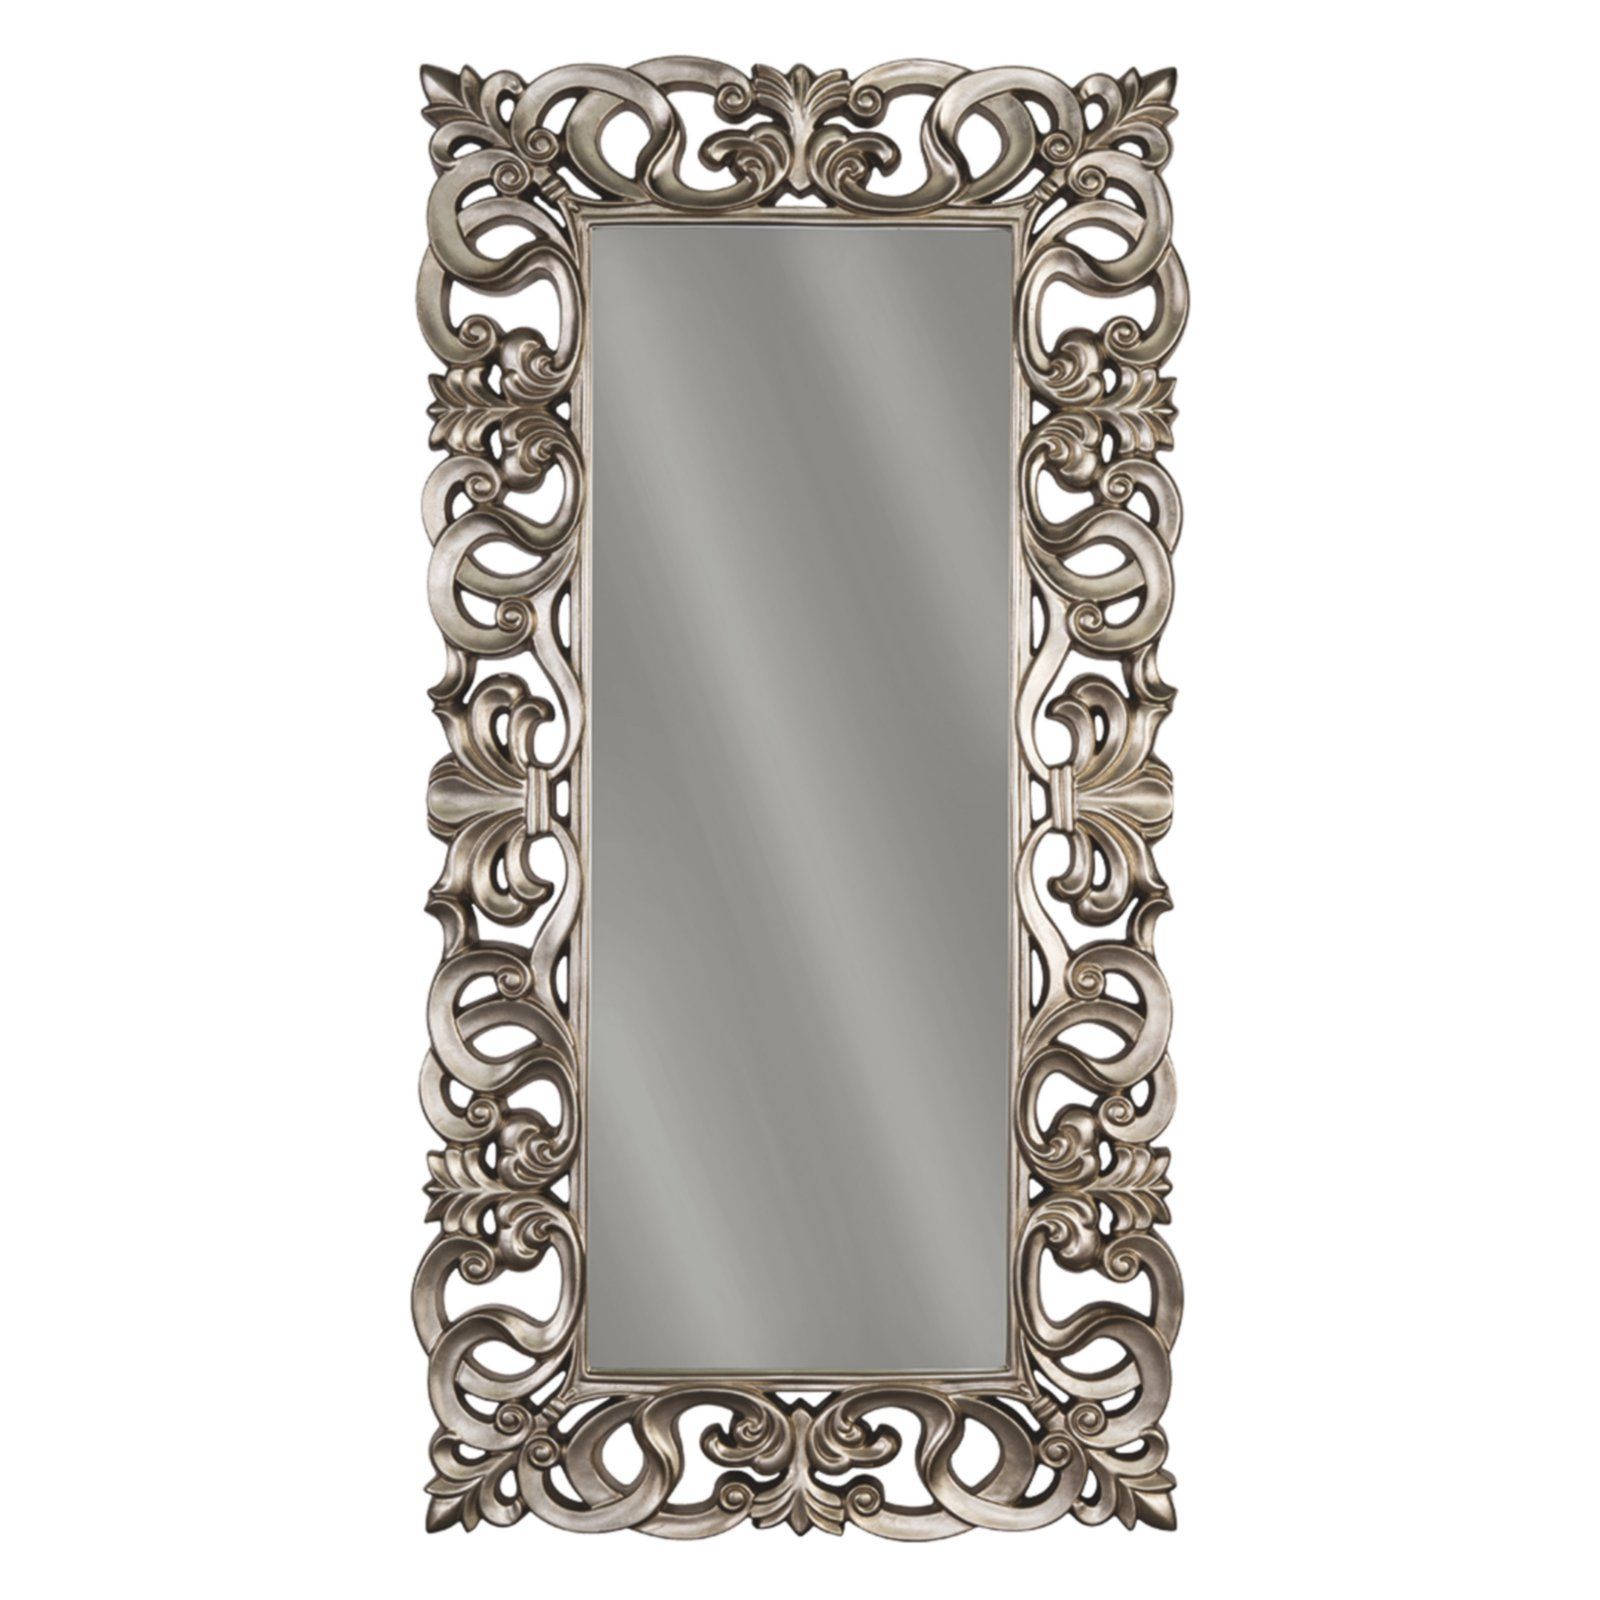 Most Current Accent Mirrors Pertaining To Ashley Lucia Accent Mirror – 30w X 71h In (View 2 of 20)